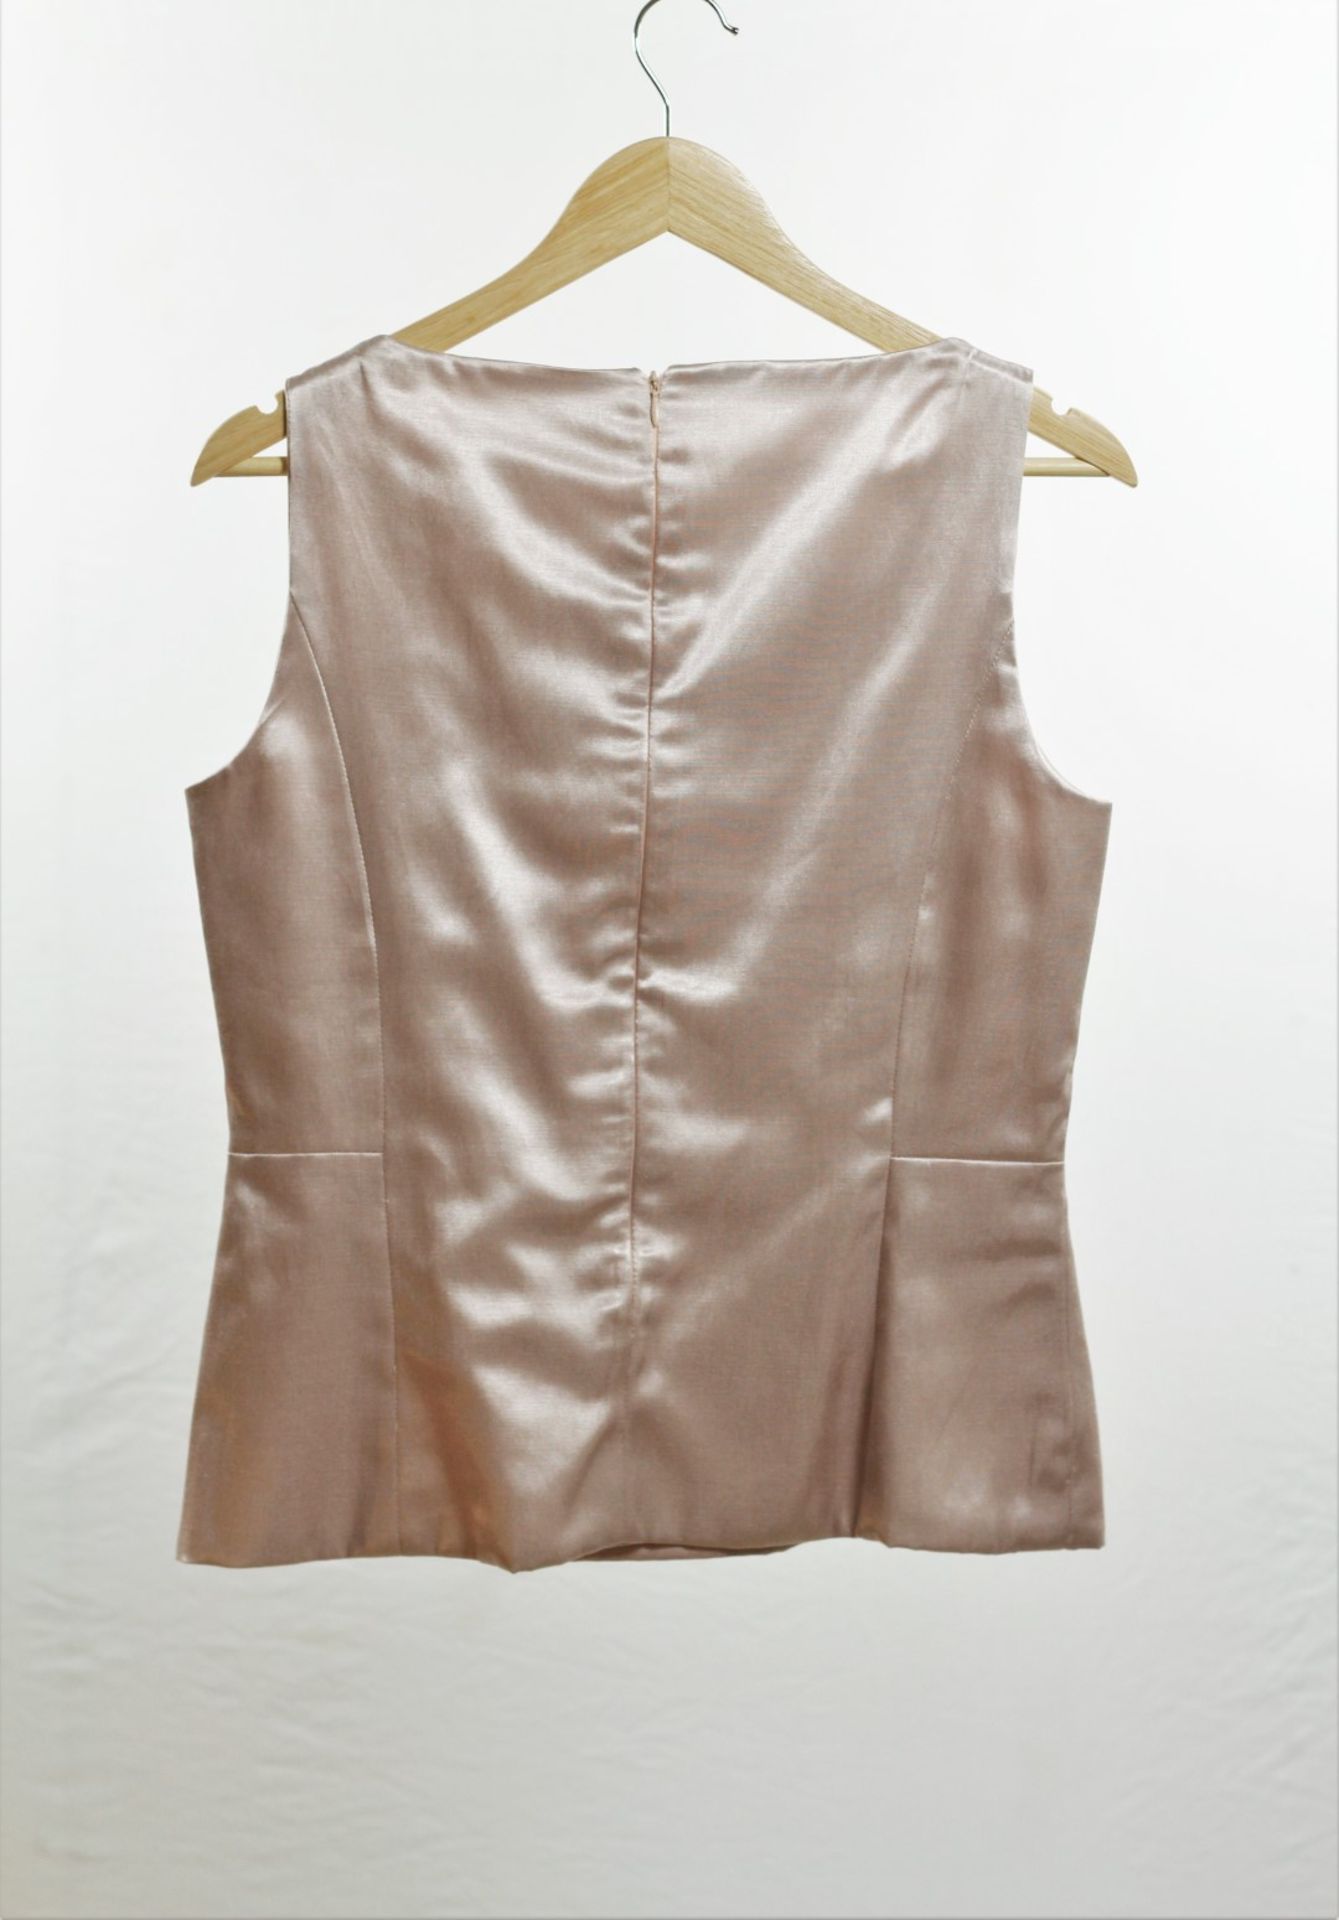 1 x Boutique Le Duc Pale Rose Vest - From a High End Clothing Boutique In The - Image 3 of 8